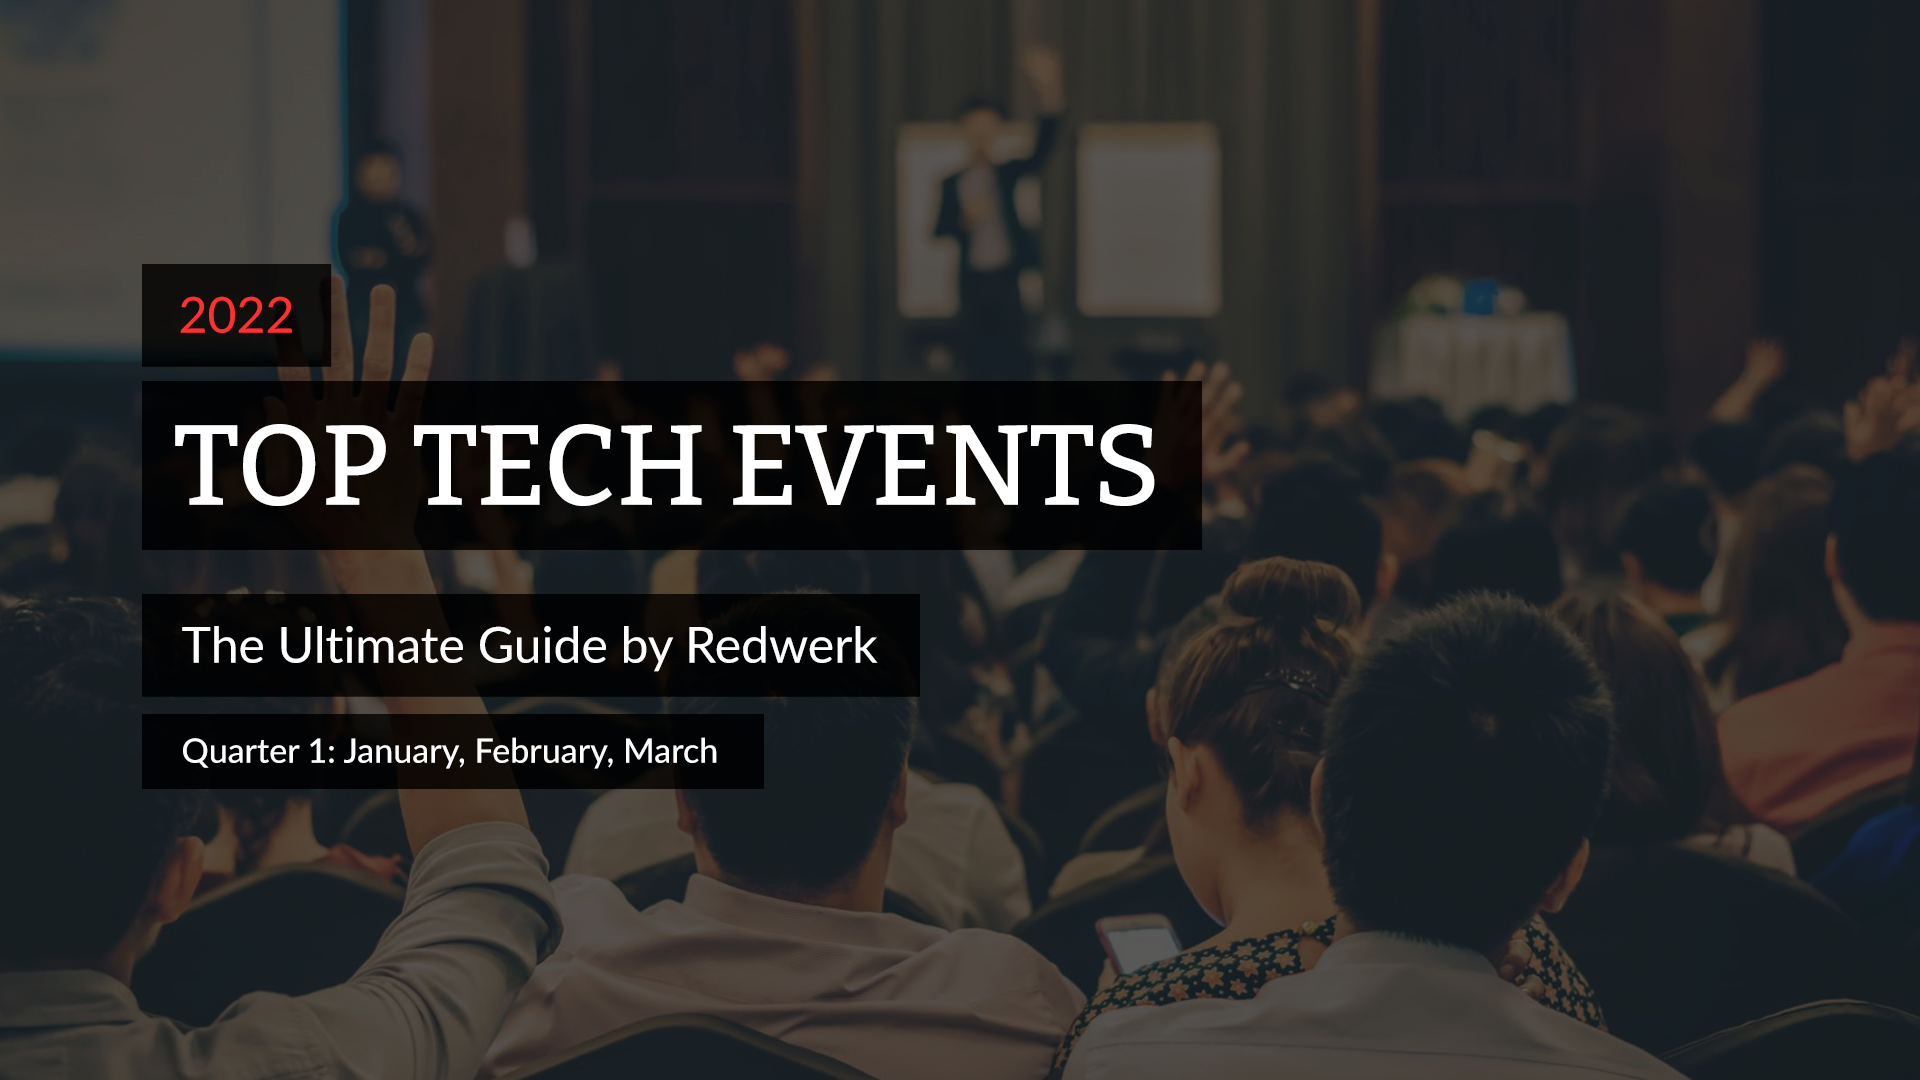 Top Tech Events in 2022: Quarter 1 Ultimate Guide